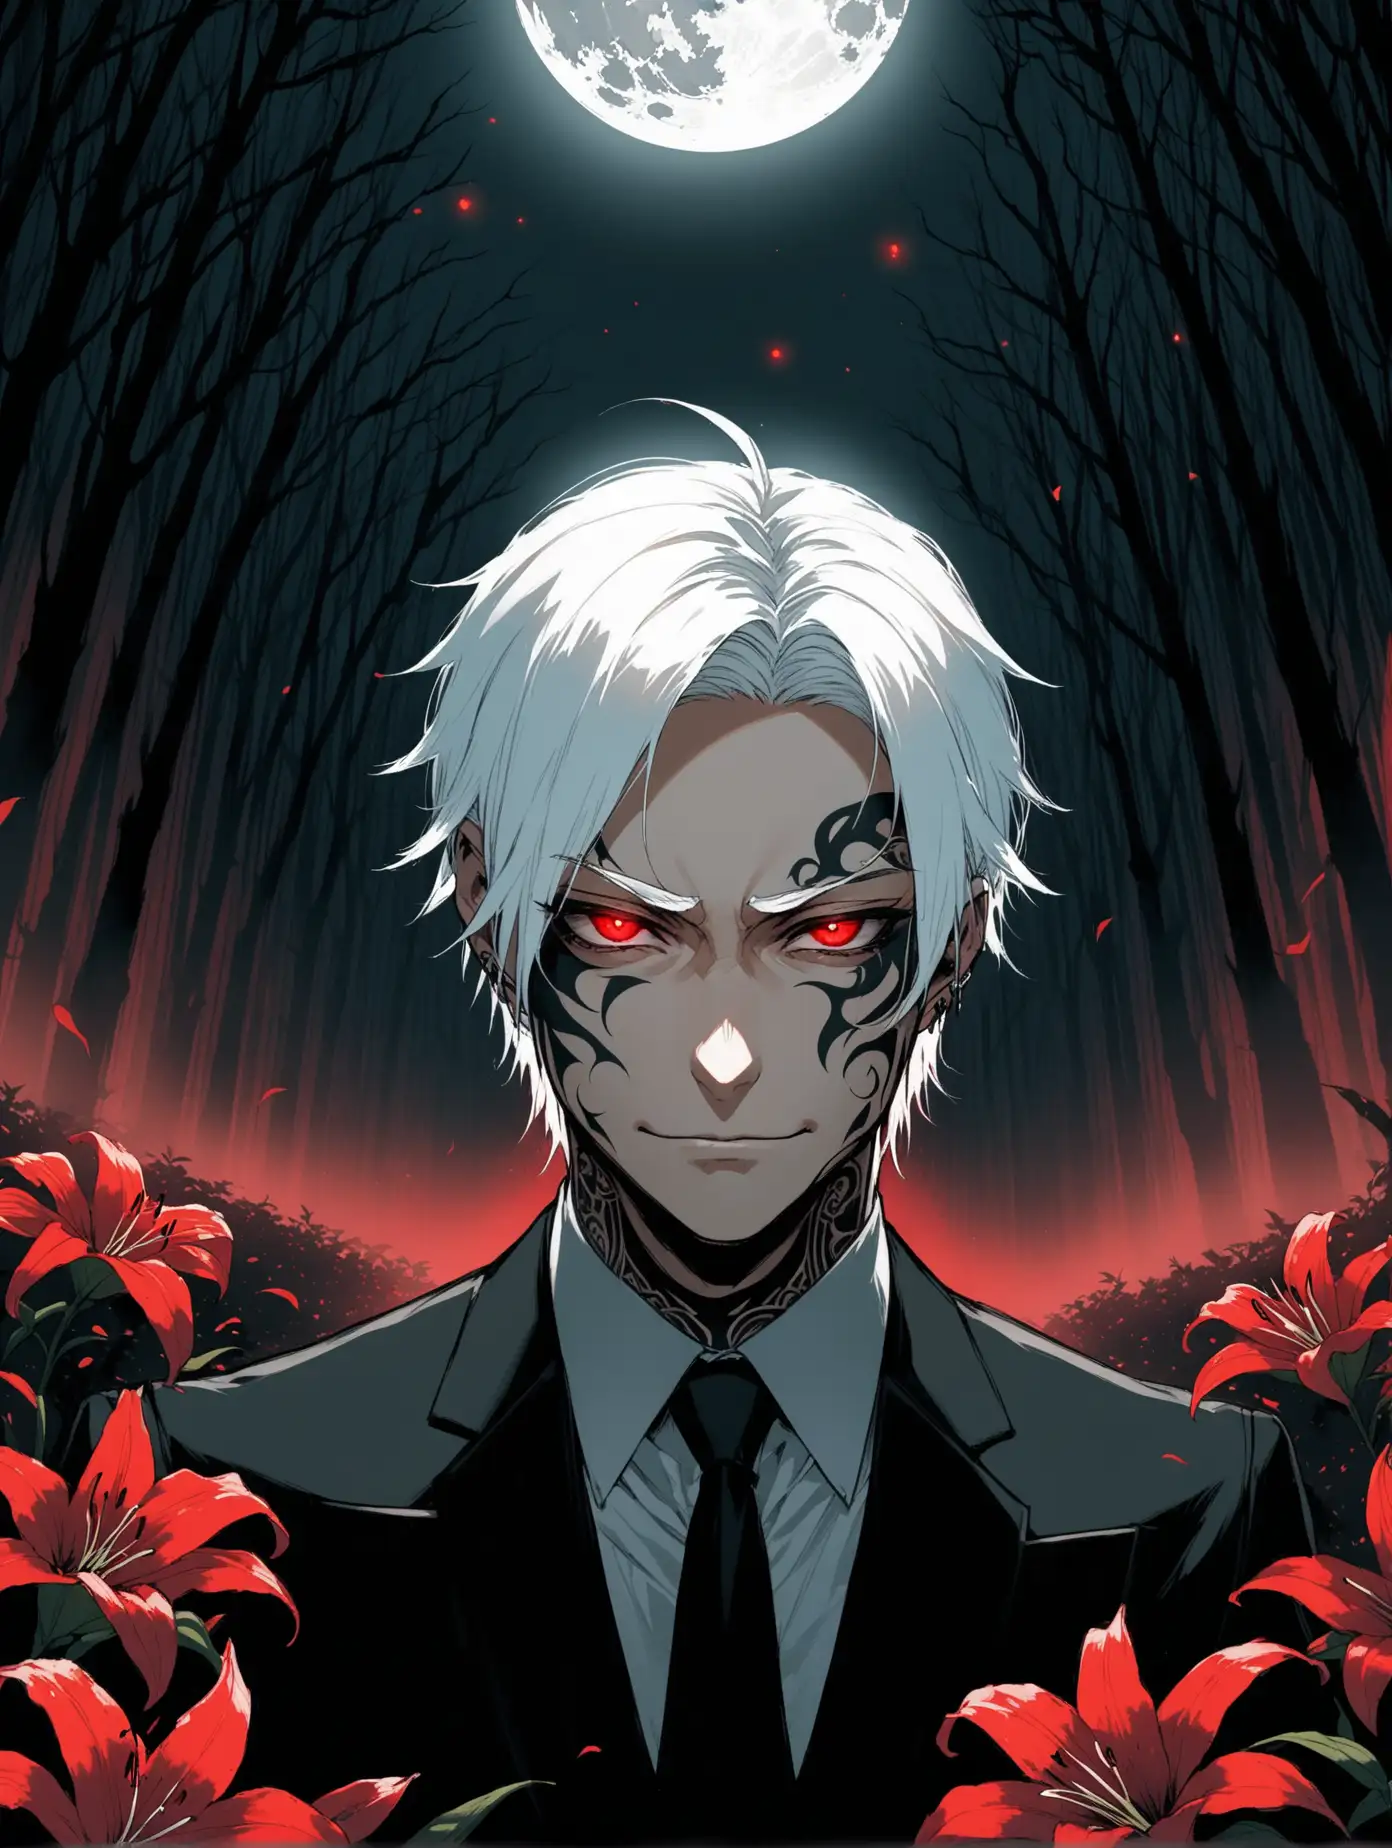 Arrogant-Man-with-White-Hair-and-Red-Eyes-in-Night-Forest-Graveyard